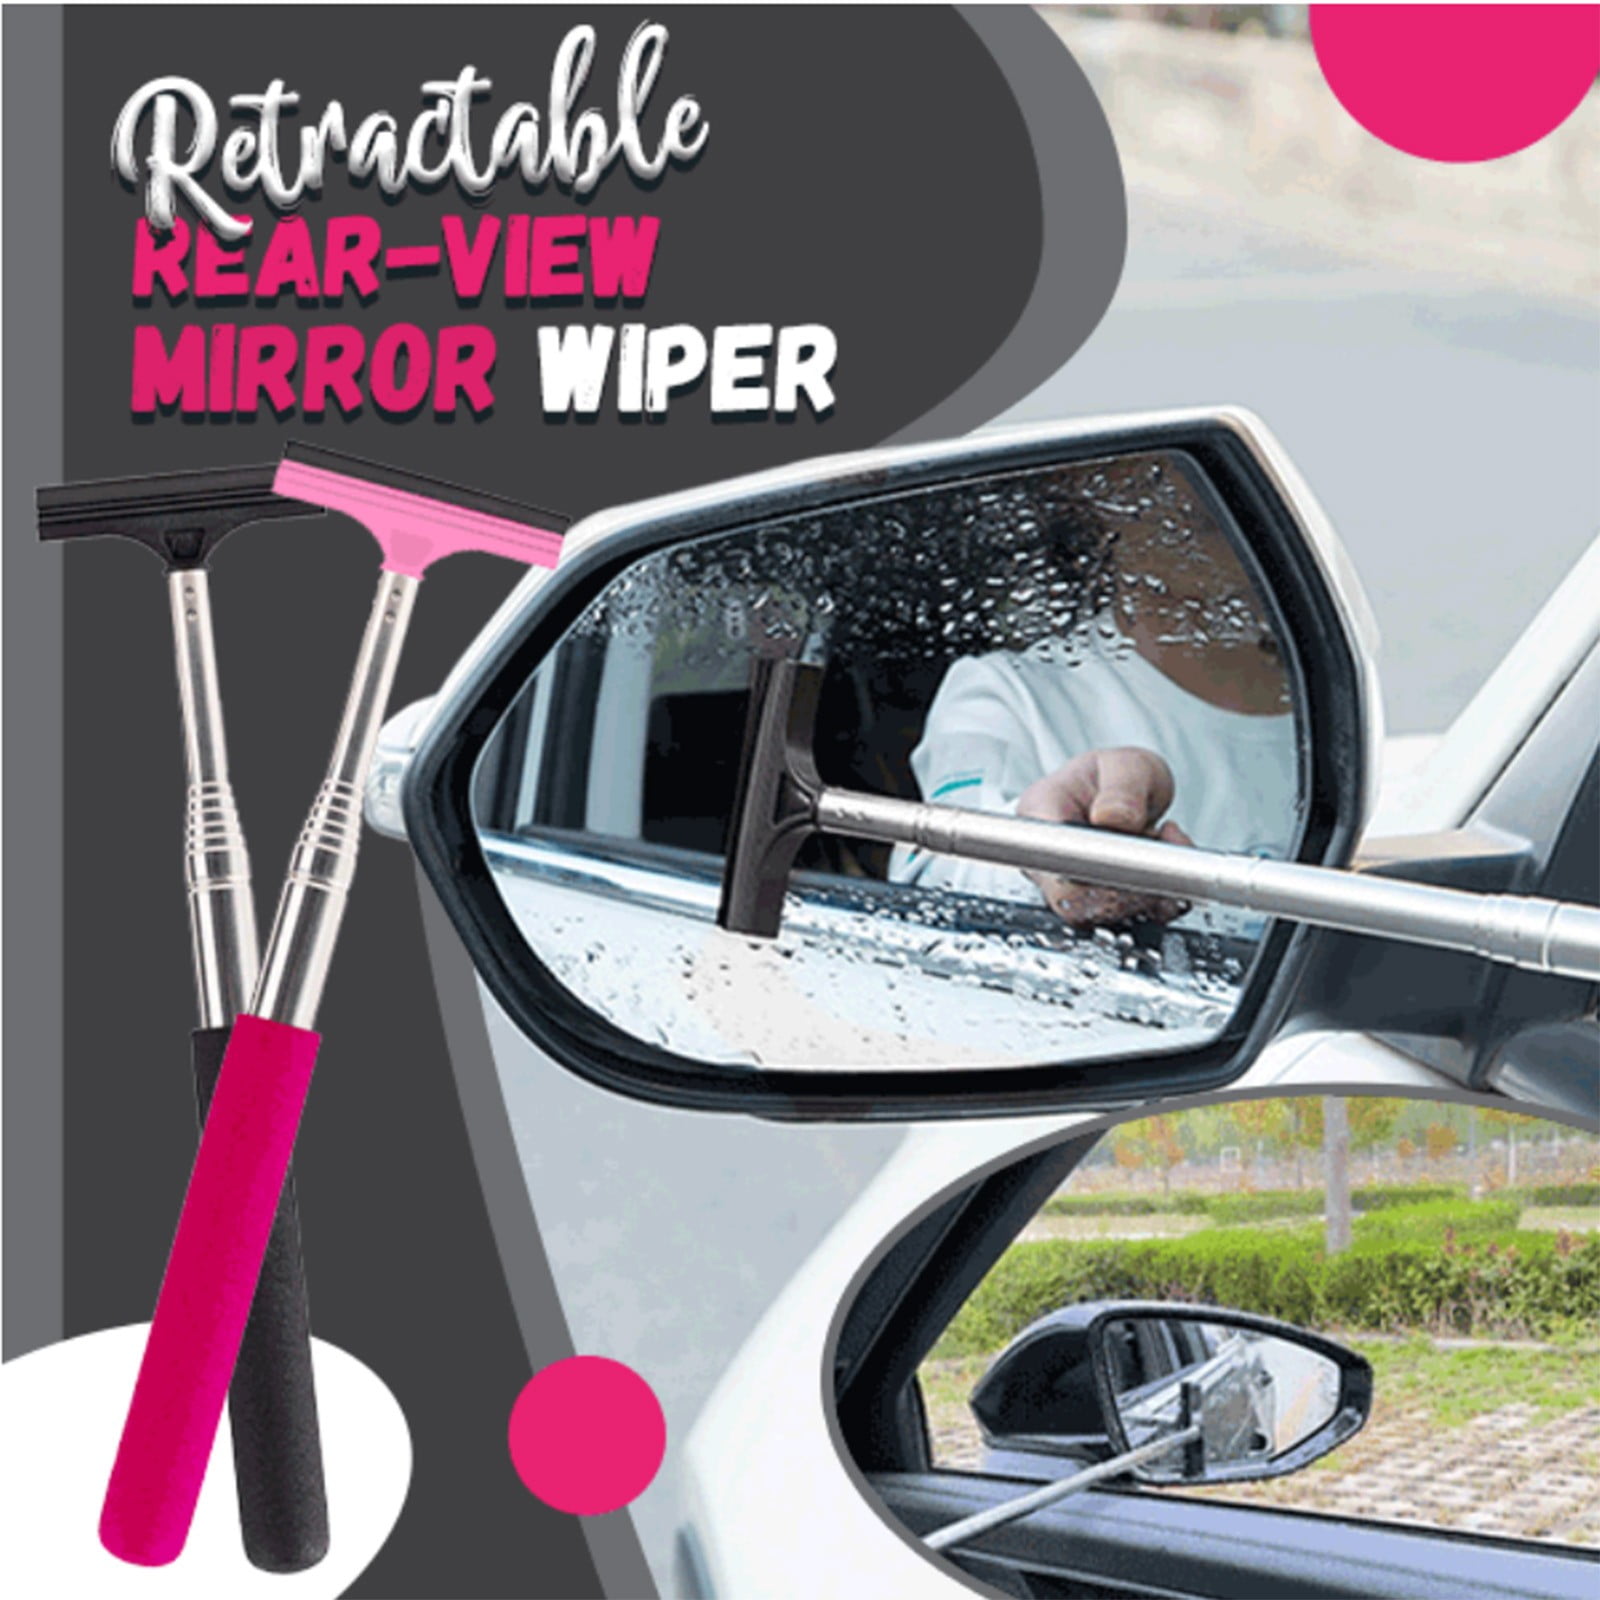 Car Rearview Mirror Wiper Mini Multifunctional Vehicle Glass Cleaner Tool